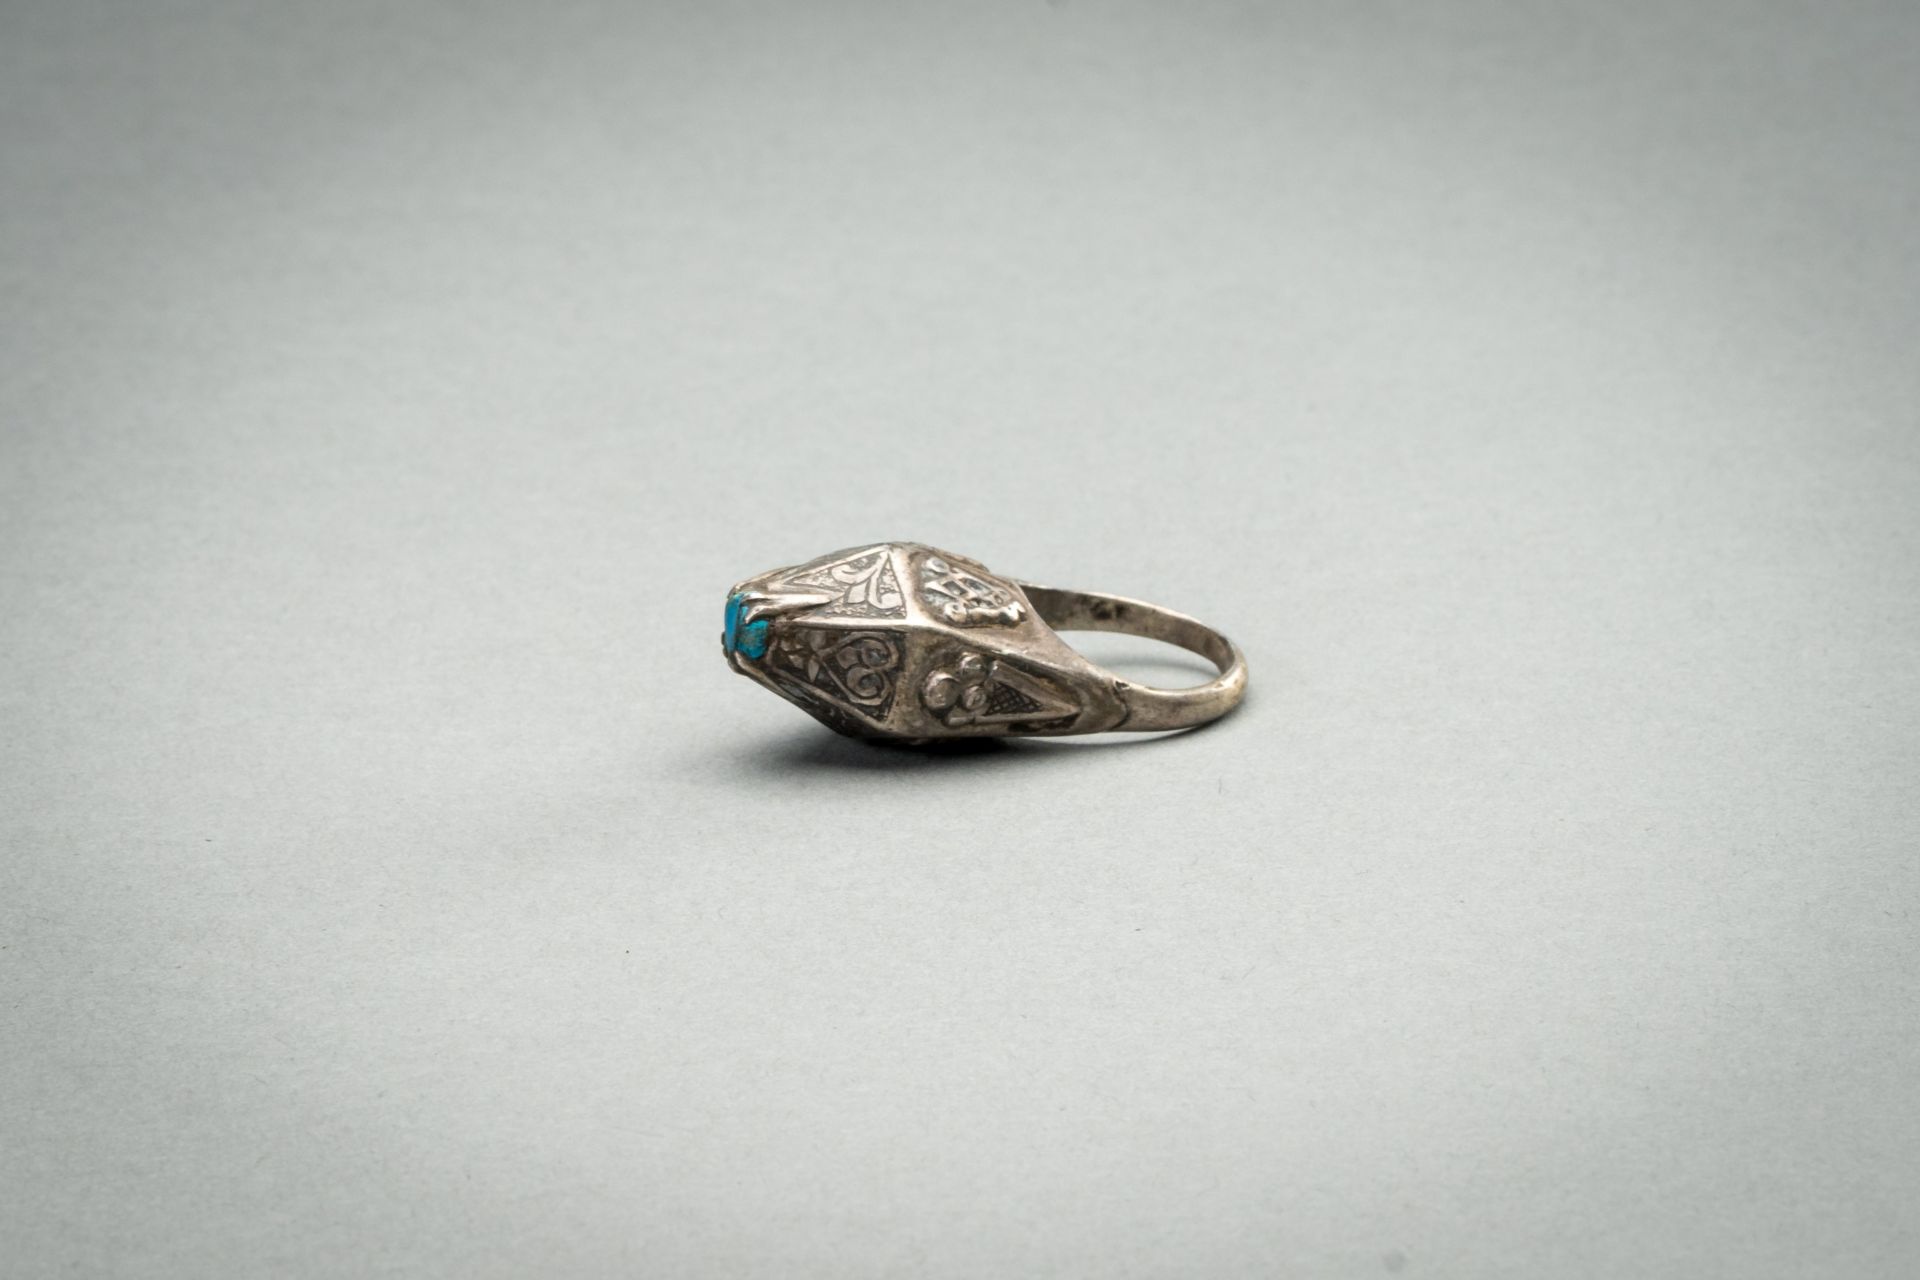 A TURQUOISE-MATRIX-SET SILVER RING, 19TH CENTURY - Image 3 of 7